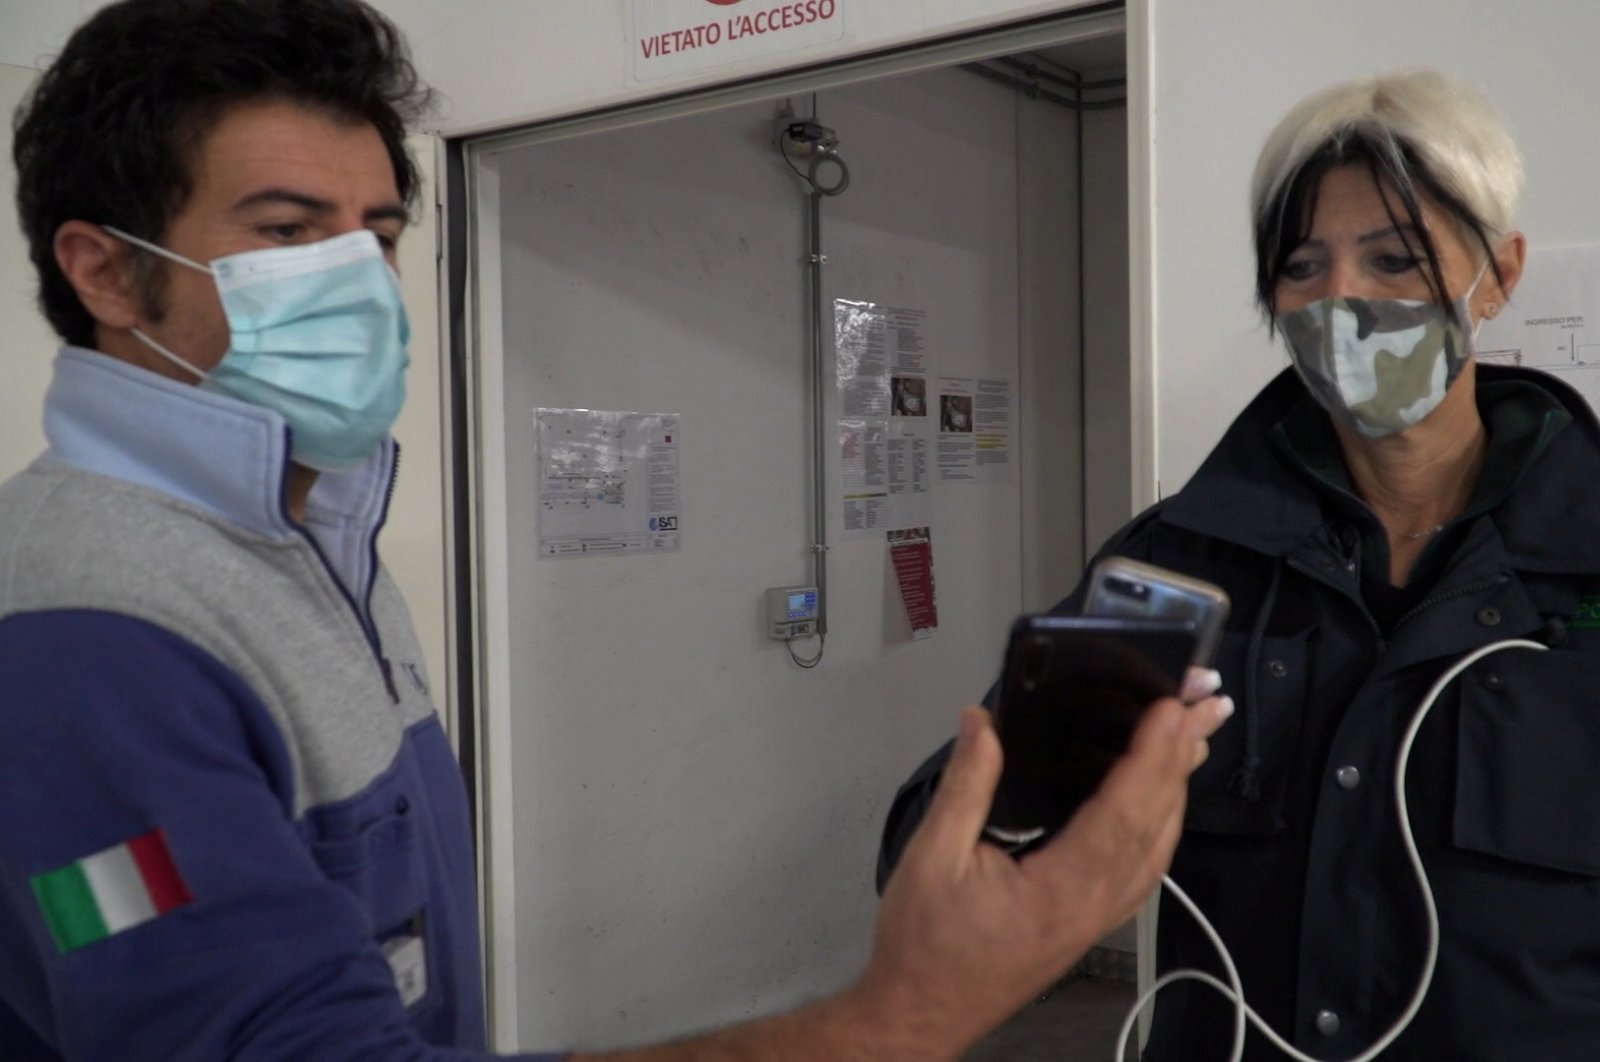 A worker has their Green Pass checked by security as they arrive for their shift at the ISA factory, which has already implemented a health pass obligation for employees ahead of the mandatory requirement in the workplace across Italy from Oct. 15, in this screengrab taken from video, in Bastia Umbria, Italy, Oct. 14, 2021. (Reuters Photo)